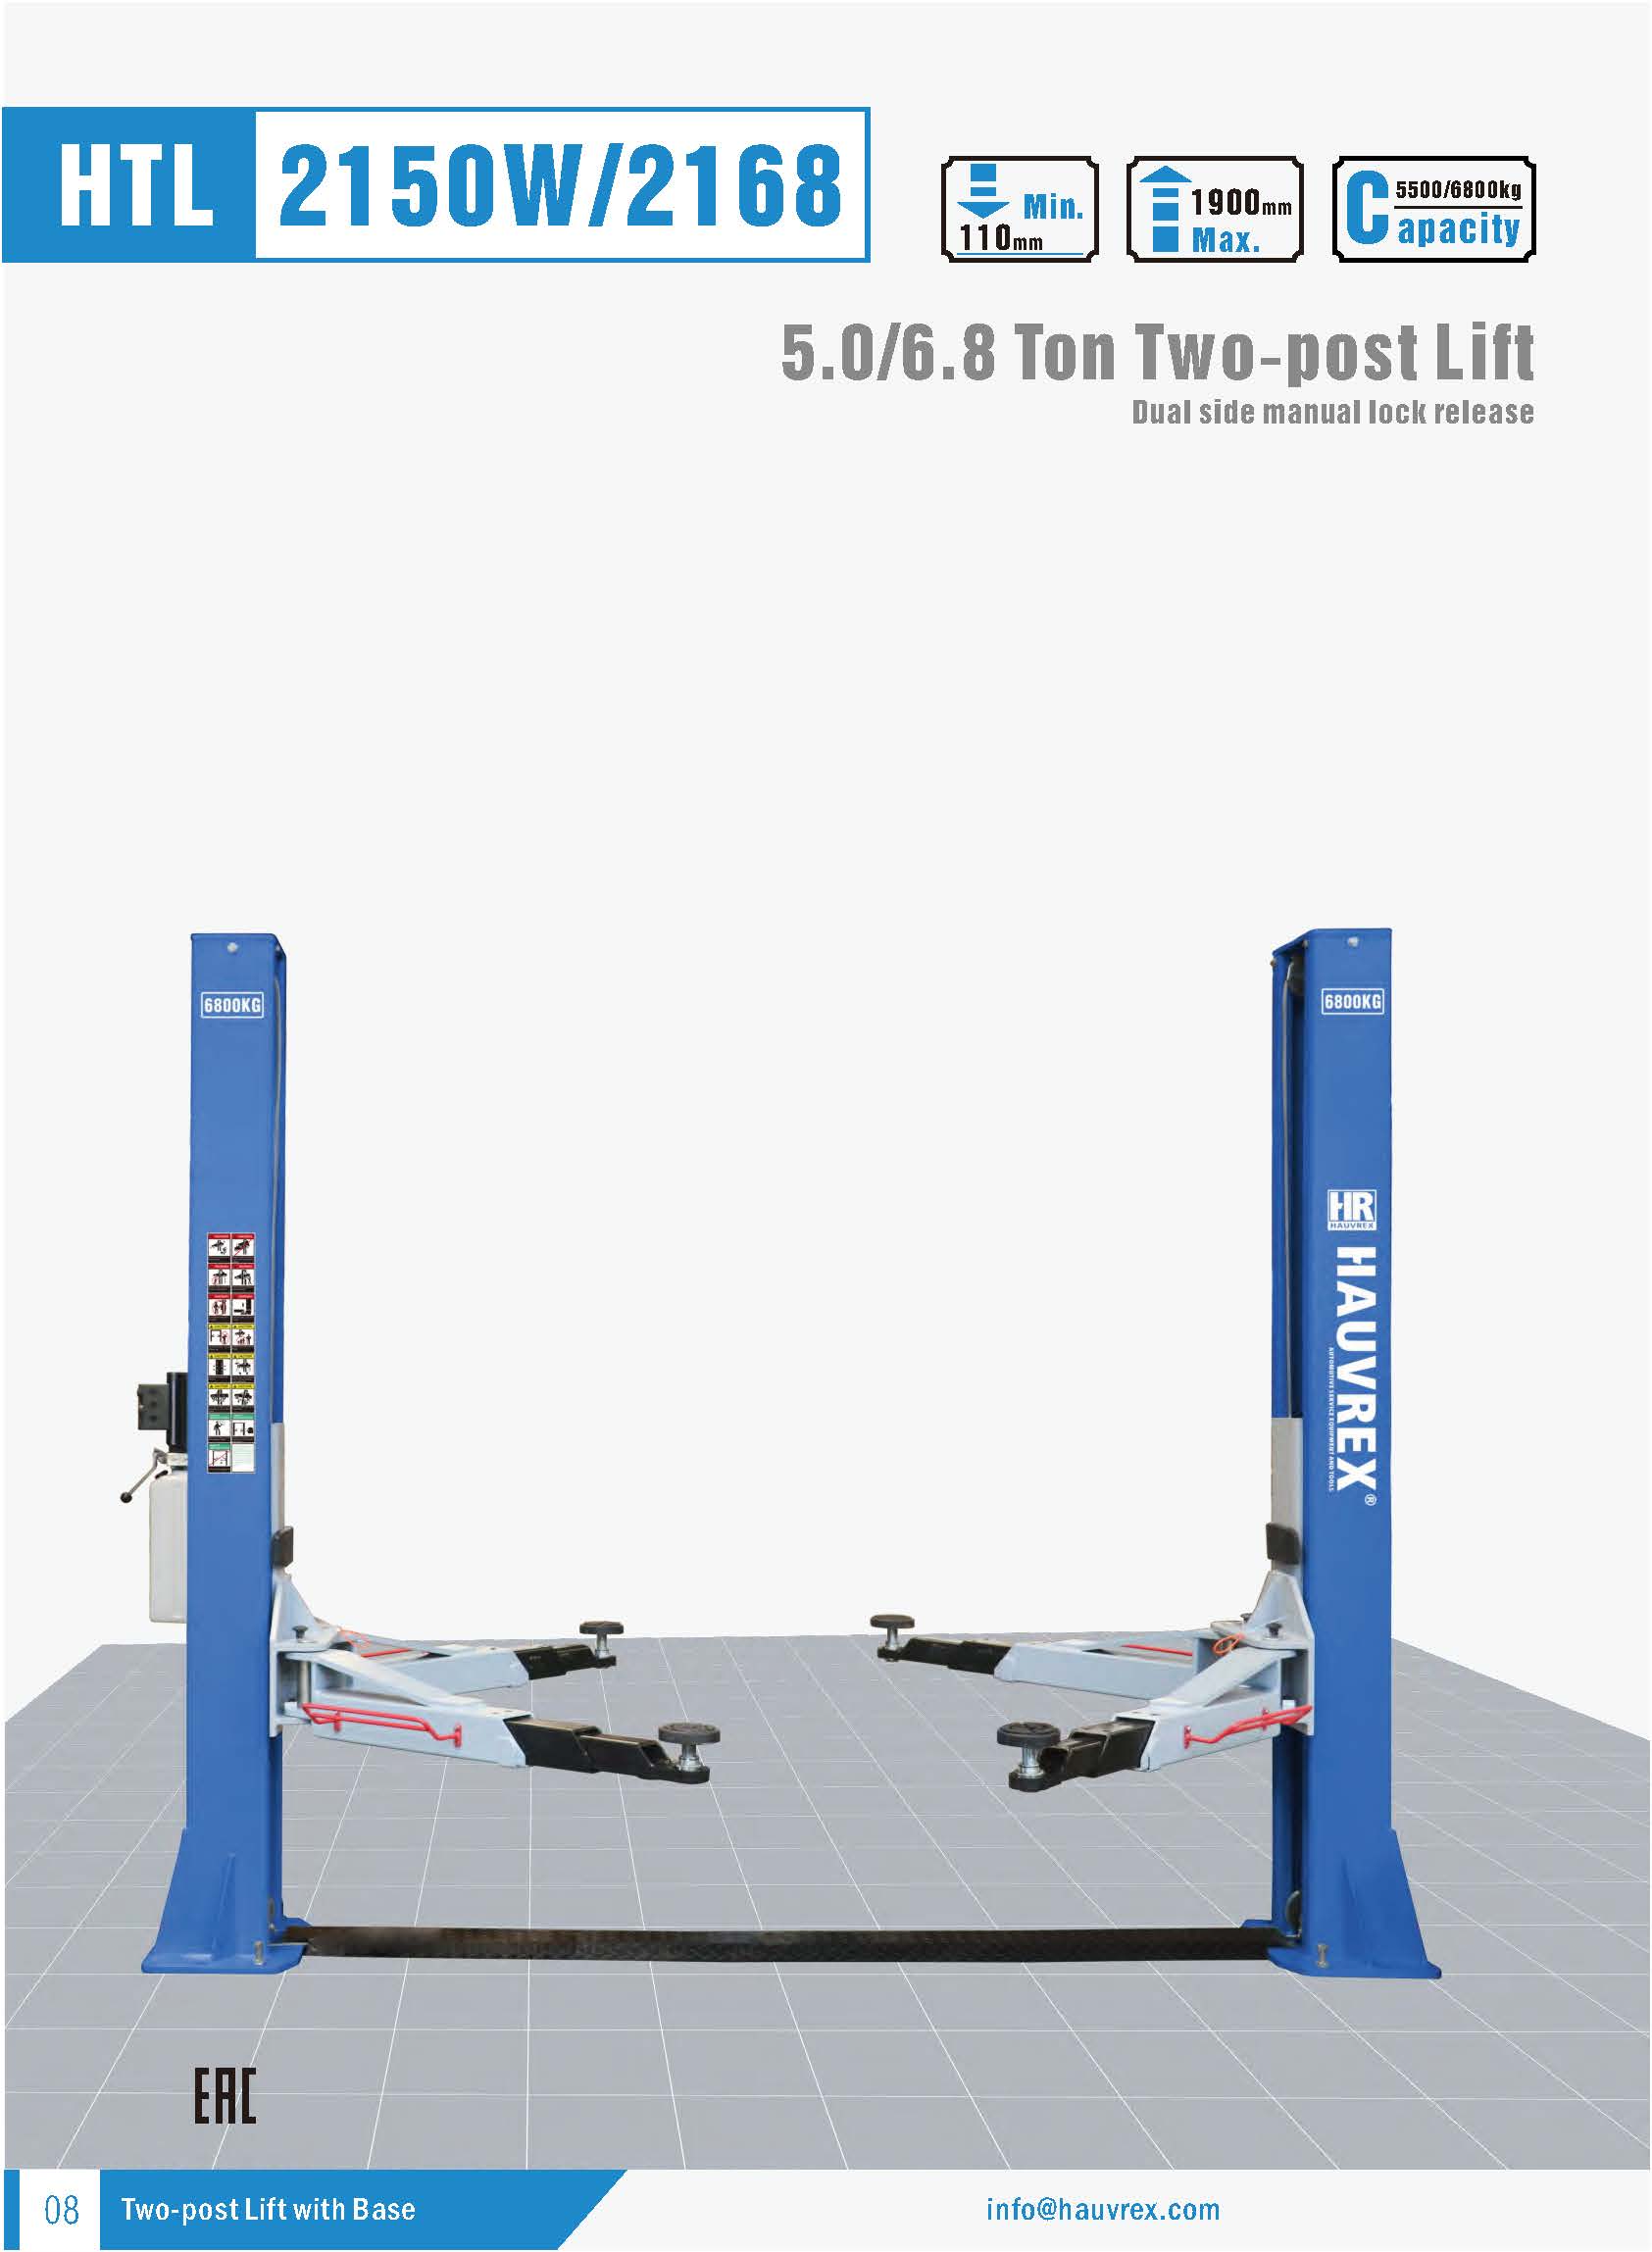 HTL2168 Two-post Lift